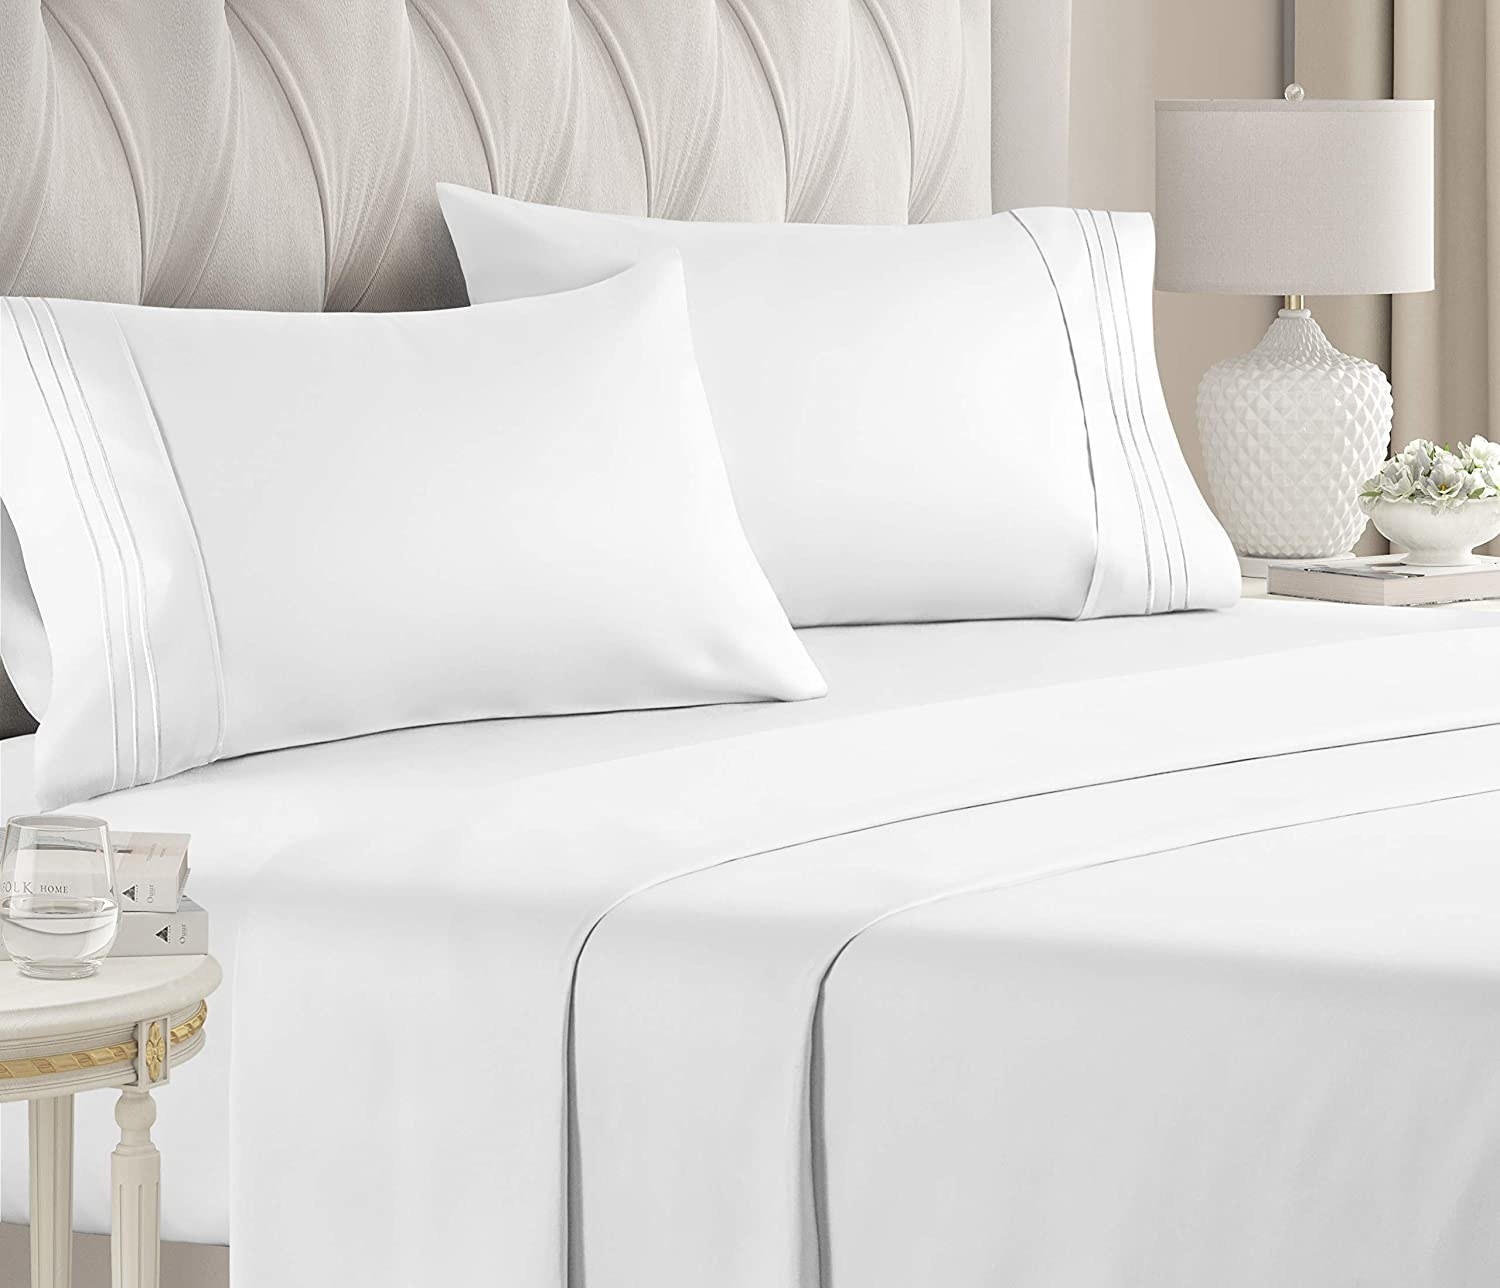 White bed sheets on a bed with matching pillows